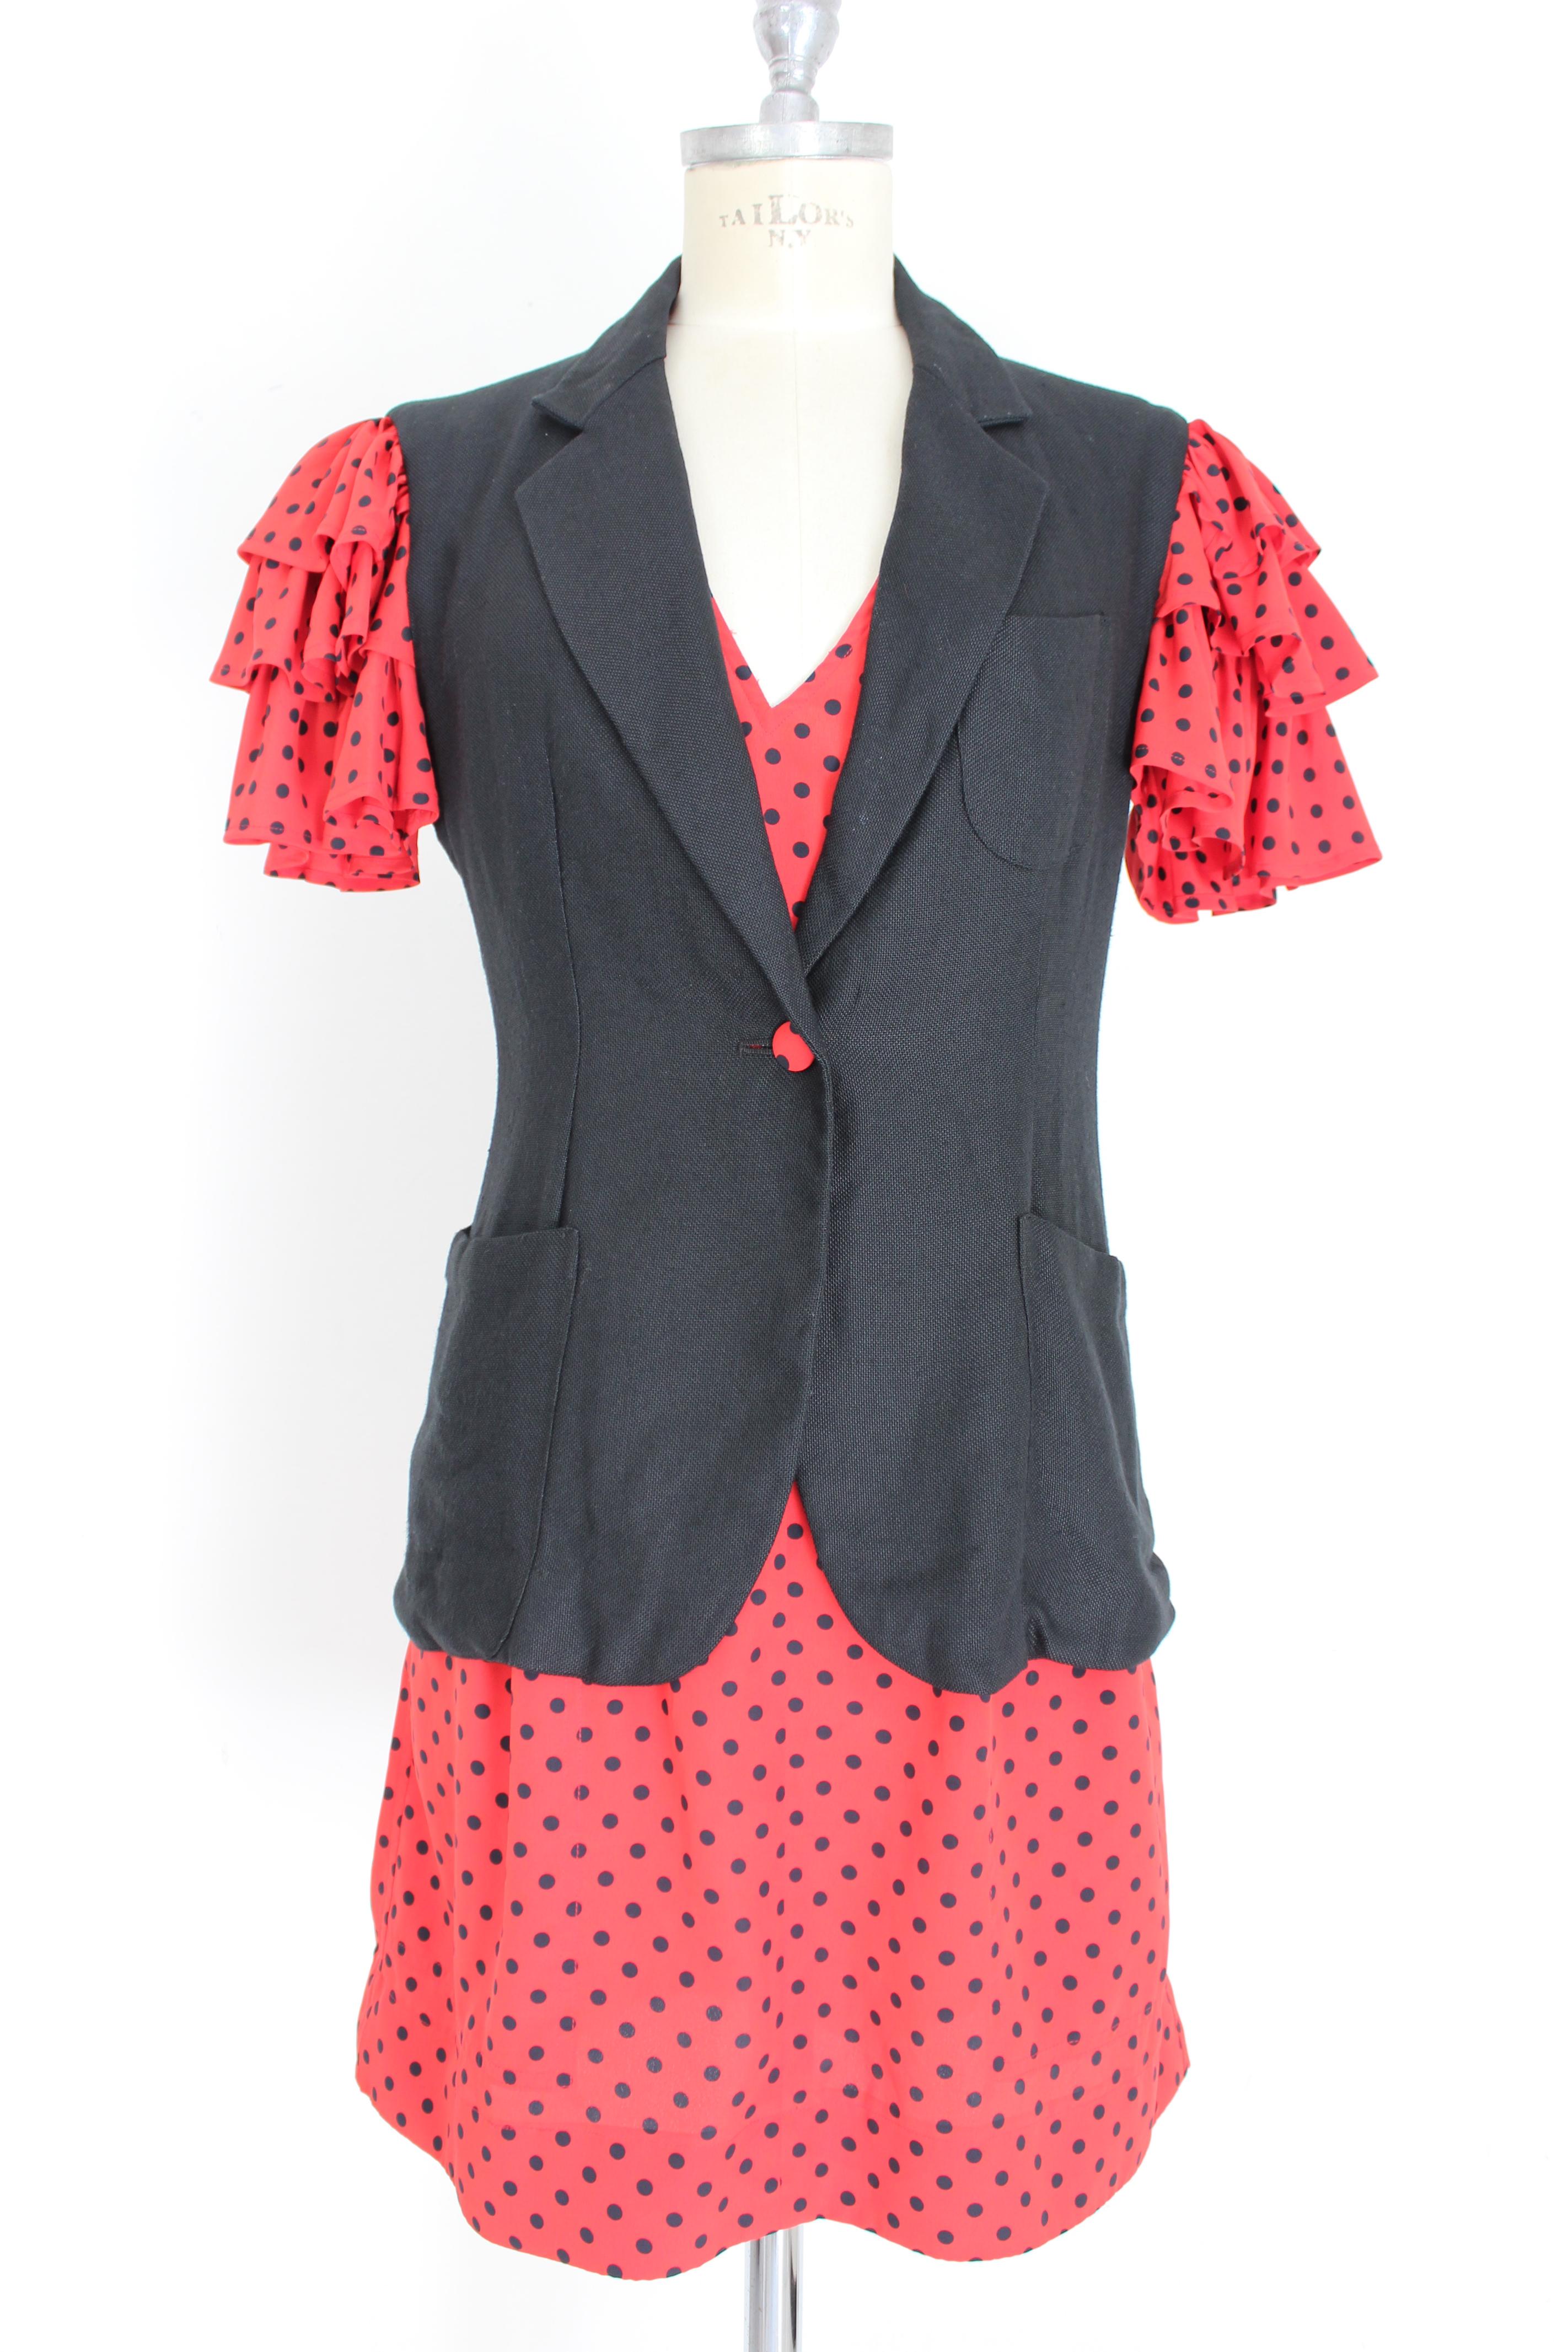 Moschino Cheap and Chic 90s vintage women's suit dress. Red and black polka dot dress and jacket. Short dress with American neckline, side pockets, zip closure on the back. 100% polyester fabric. Fitted jacket with flounced sleeves, 100% rayon